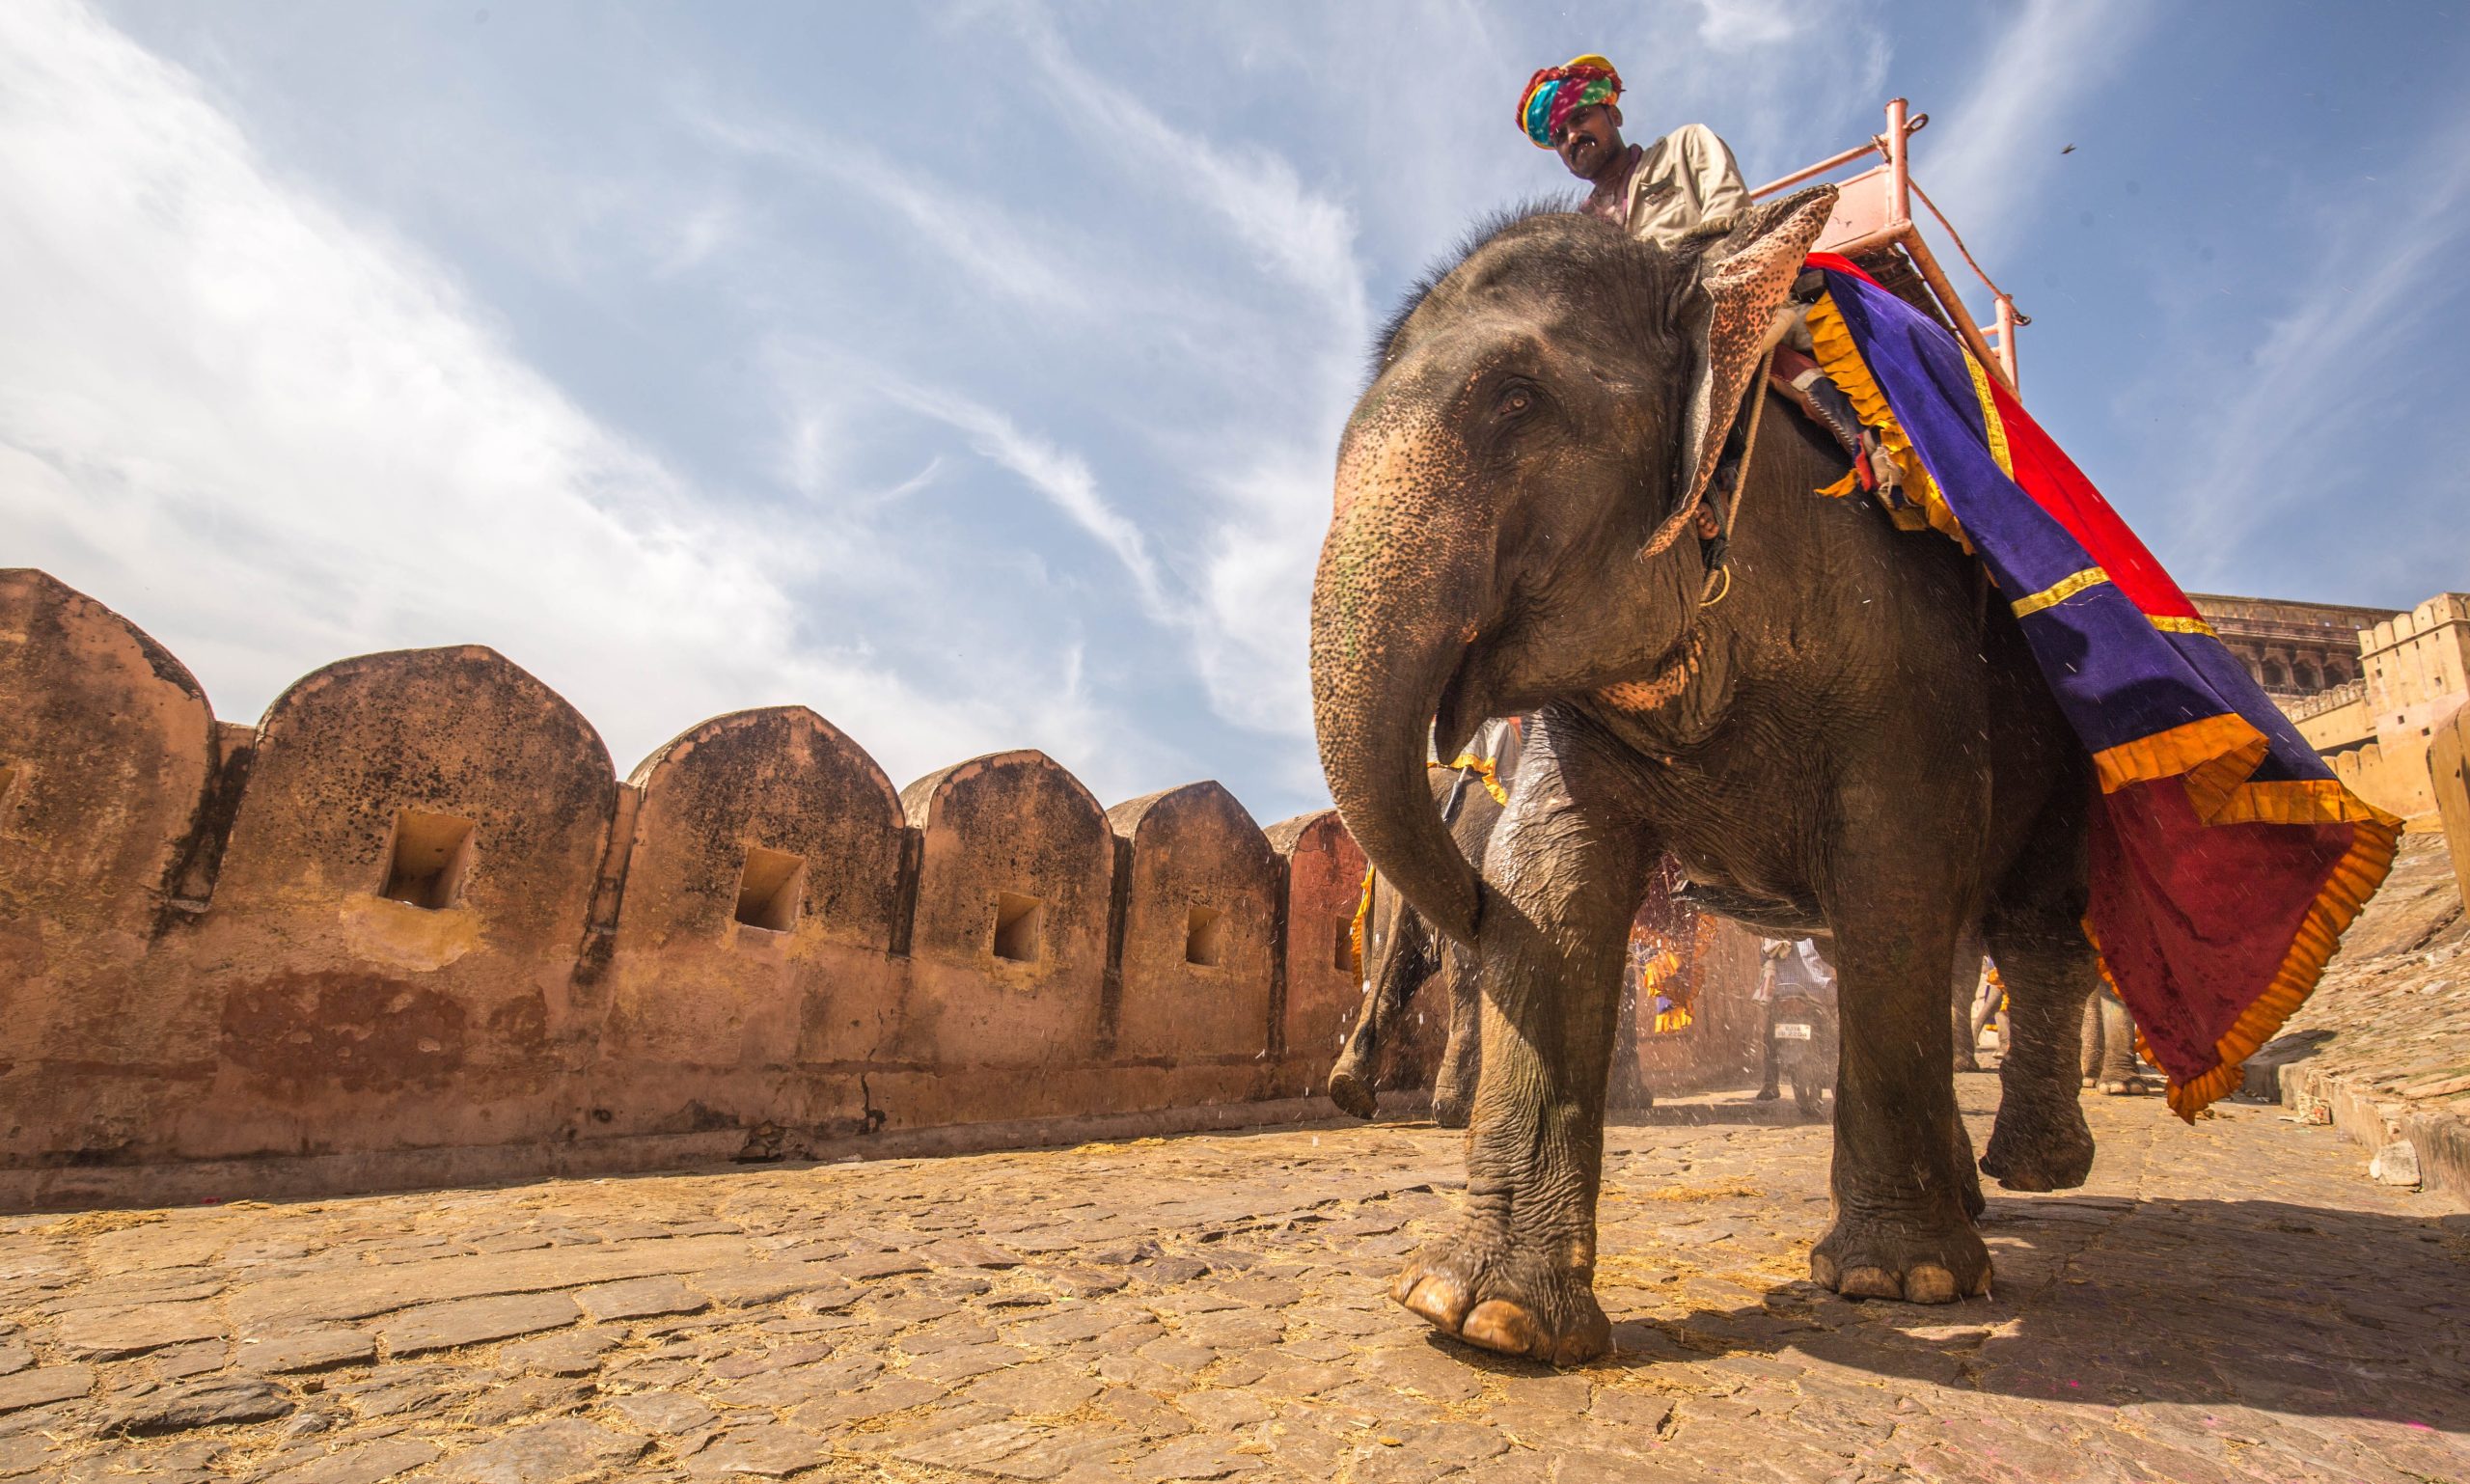 Do’s and Don’ts While On a Trip to Jaipur